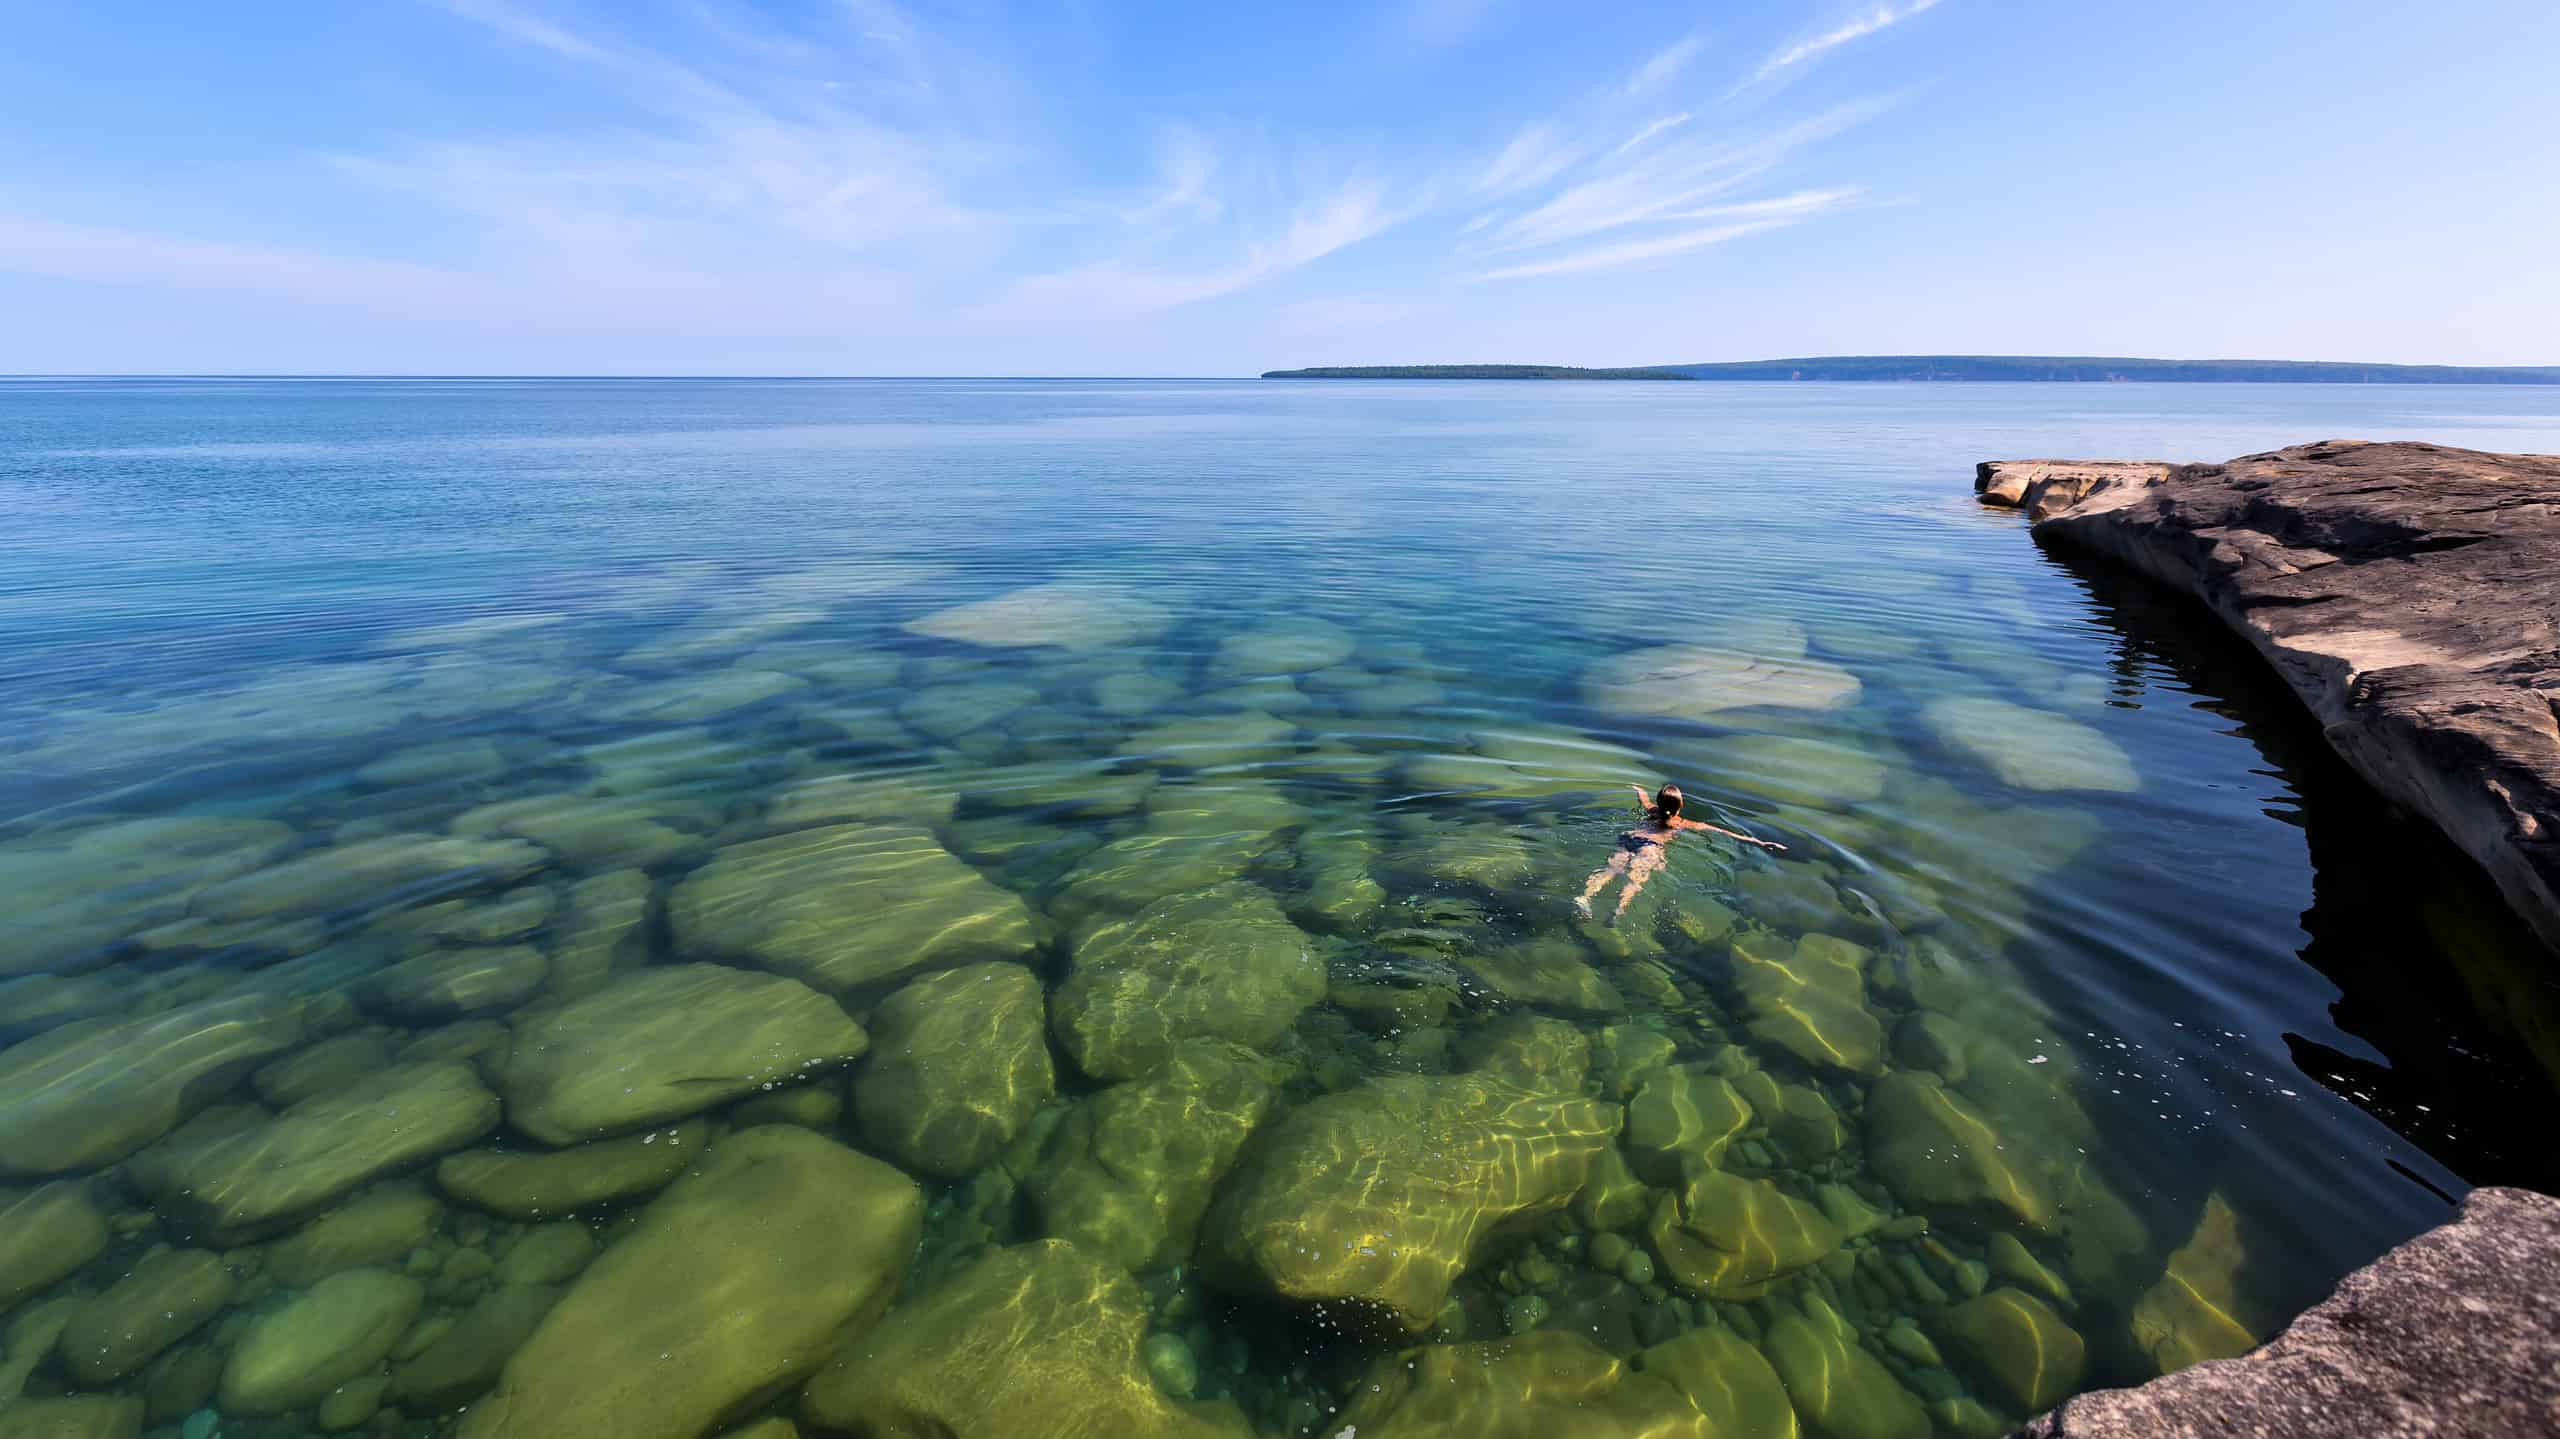 A girl swims in Lake Superior in the upper peninsula of Lake Michigan. Rocks are visable through the glass like, pristine waters. Pictured Rocks National Lakeshore is in the distance.